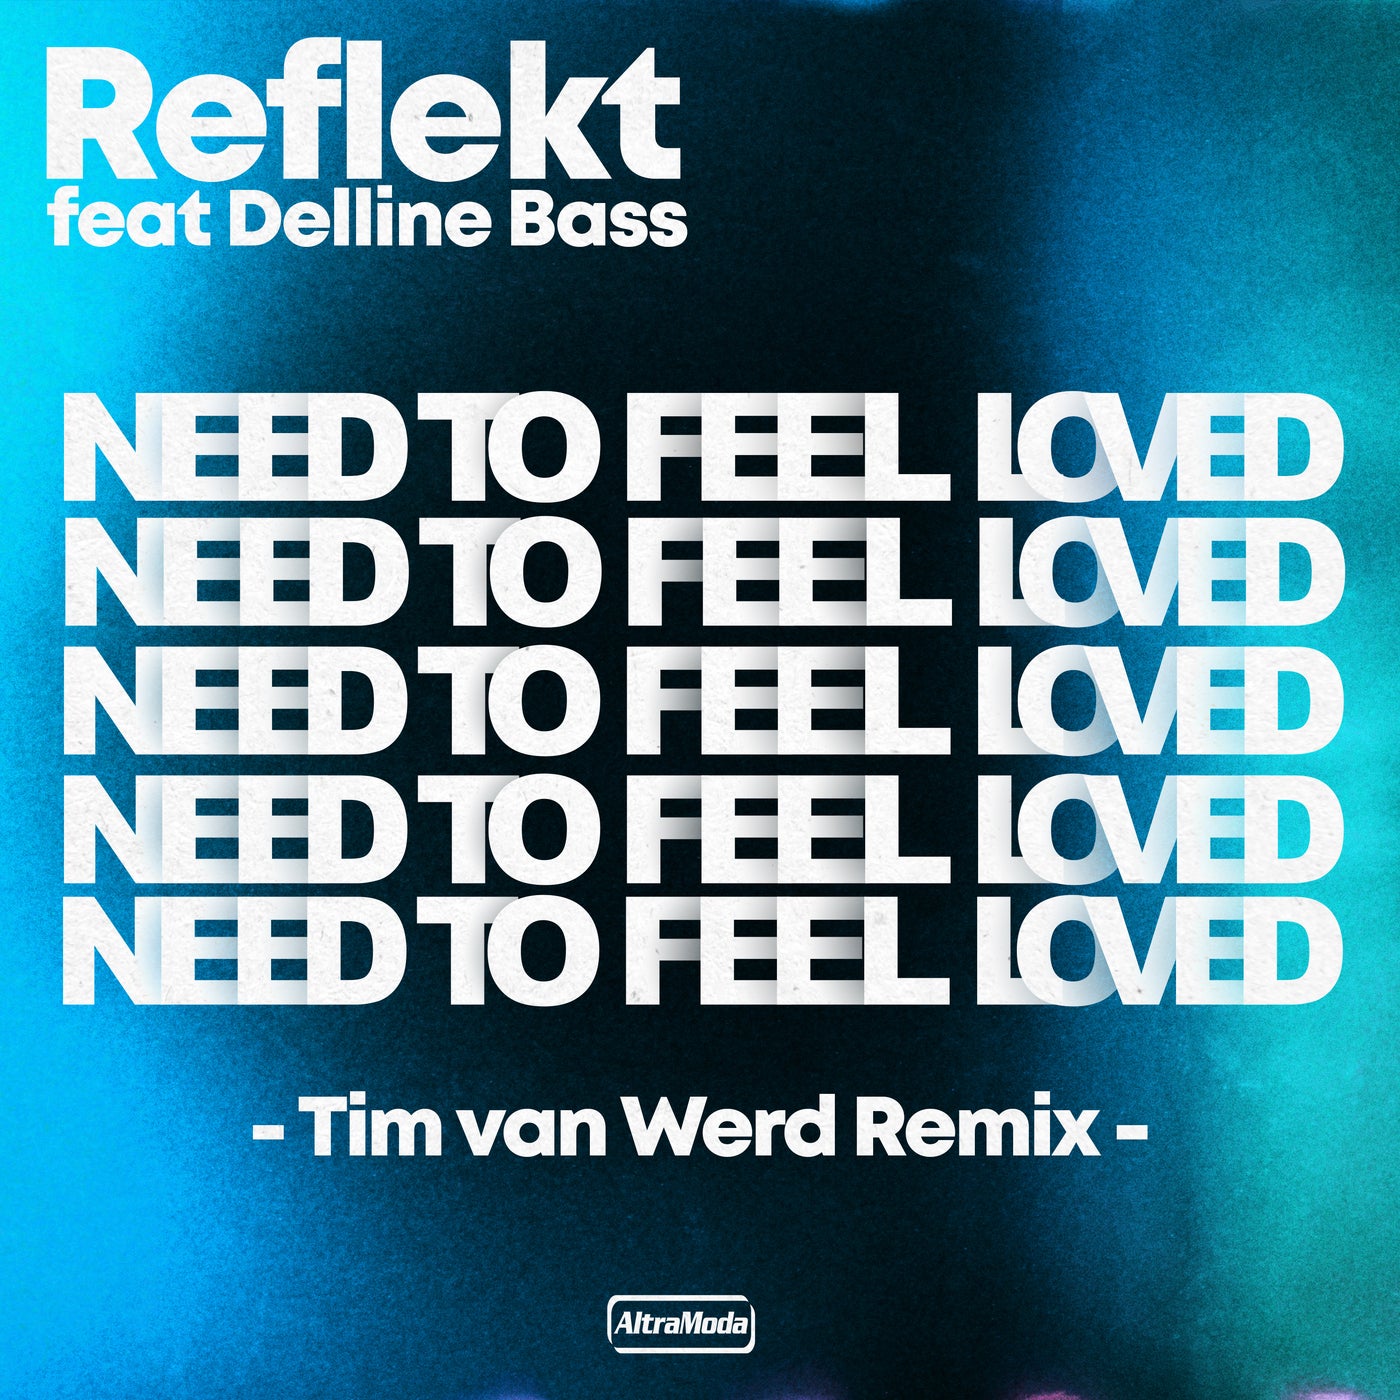 Need to feel loved feat delline. Reflekt ft. Delline Bass need to feel Loved. Reflekt, tim van werd feat. Delline Bass - need to feel Loved. Reflekt feat. Delline Bass. Reflekt feat. Delline Bass - need to feel Loved(Adam k & Soha Vocal Mix).